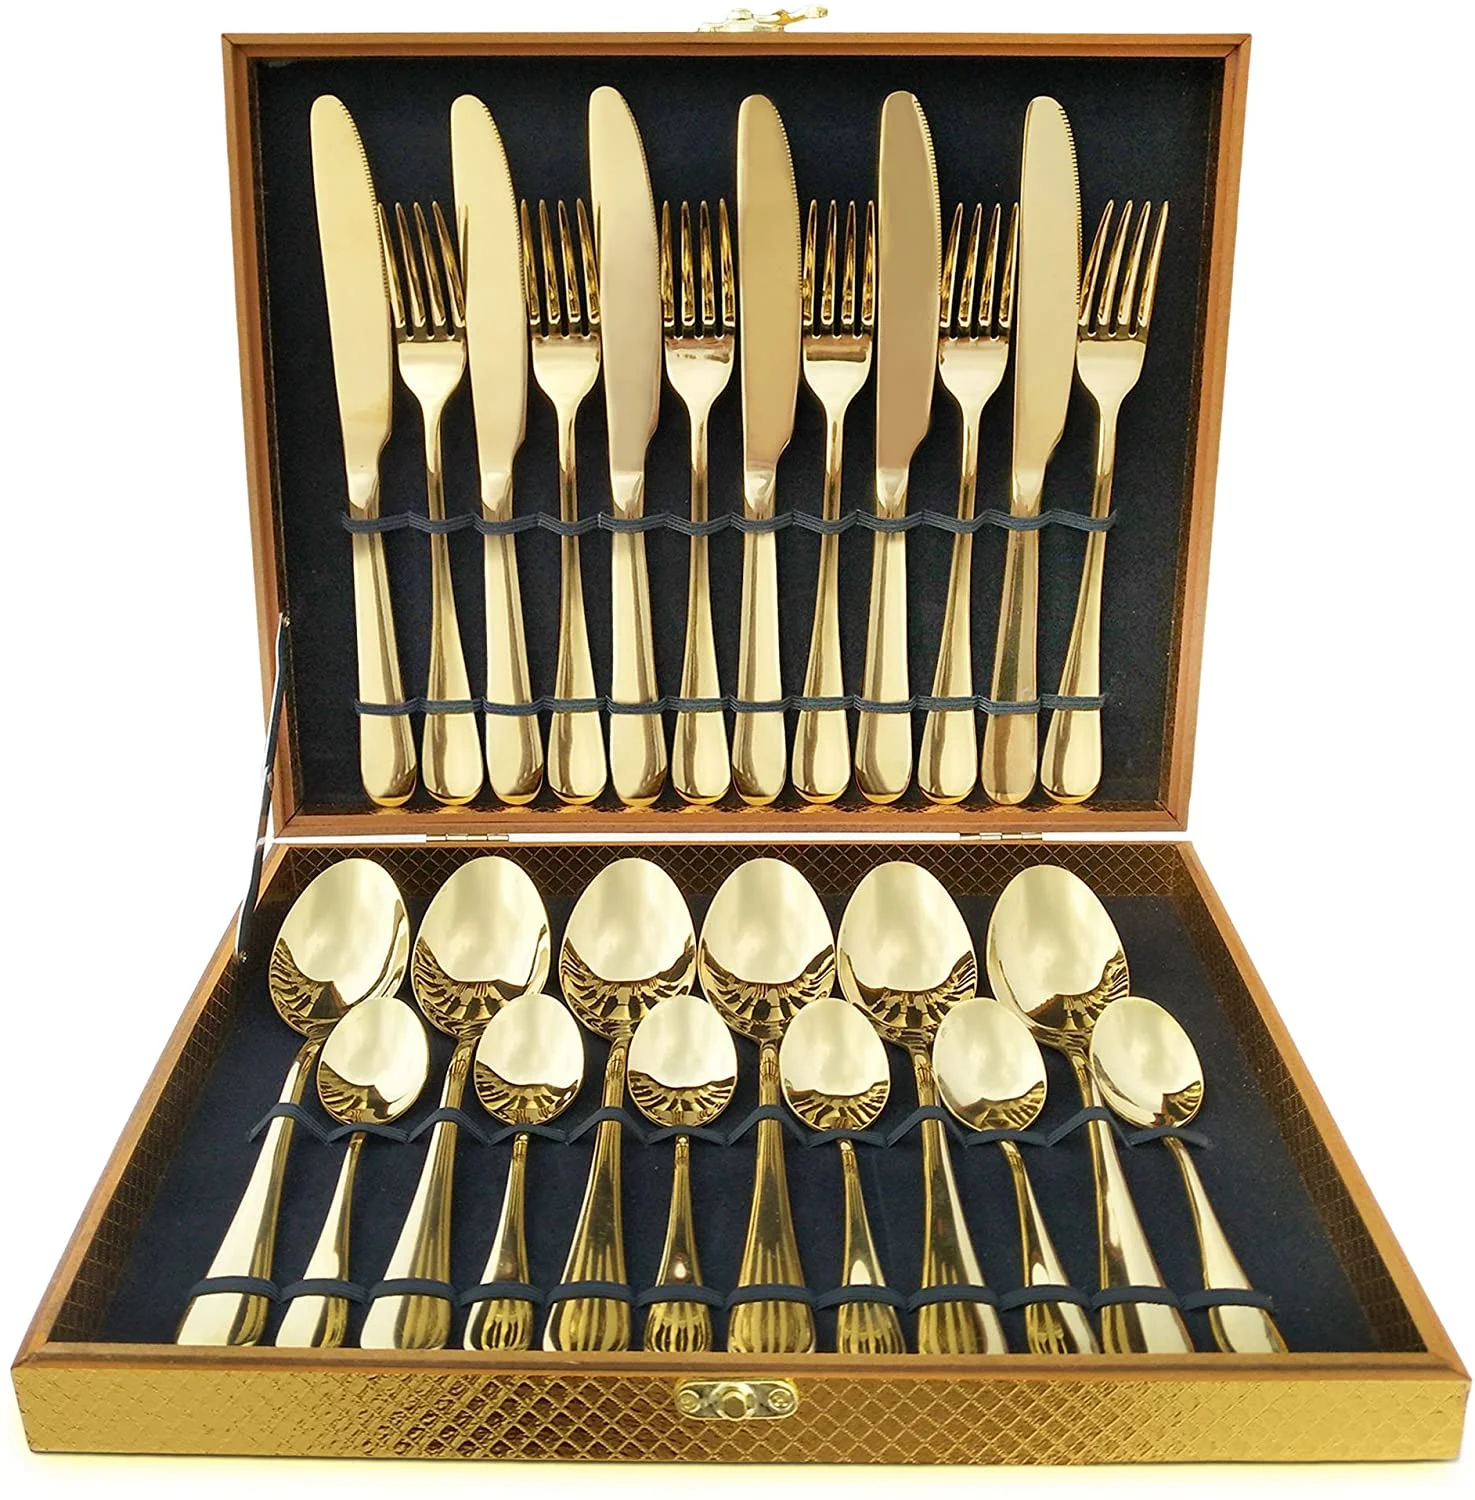 

Knife Spoon Fork Set Gold Cutlery 24PCS Stainless Steel Flatware sets Cutery Set, Sliver/gold/rose gold/rainbow/black